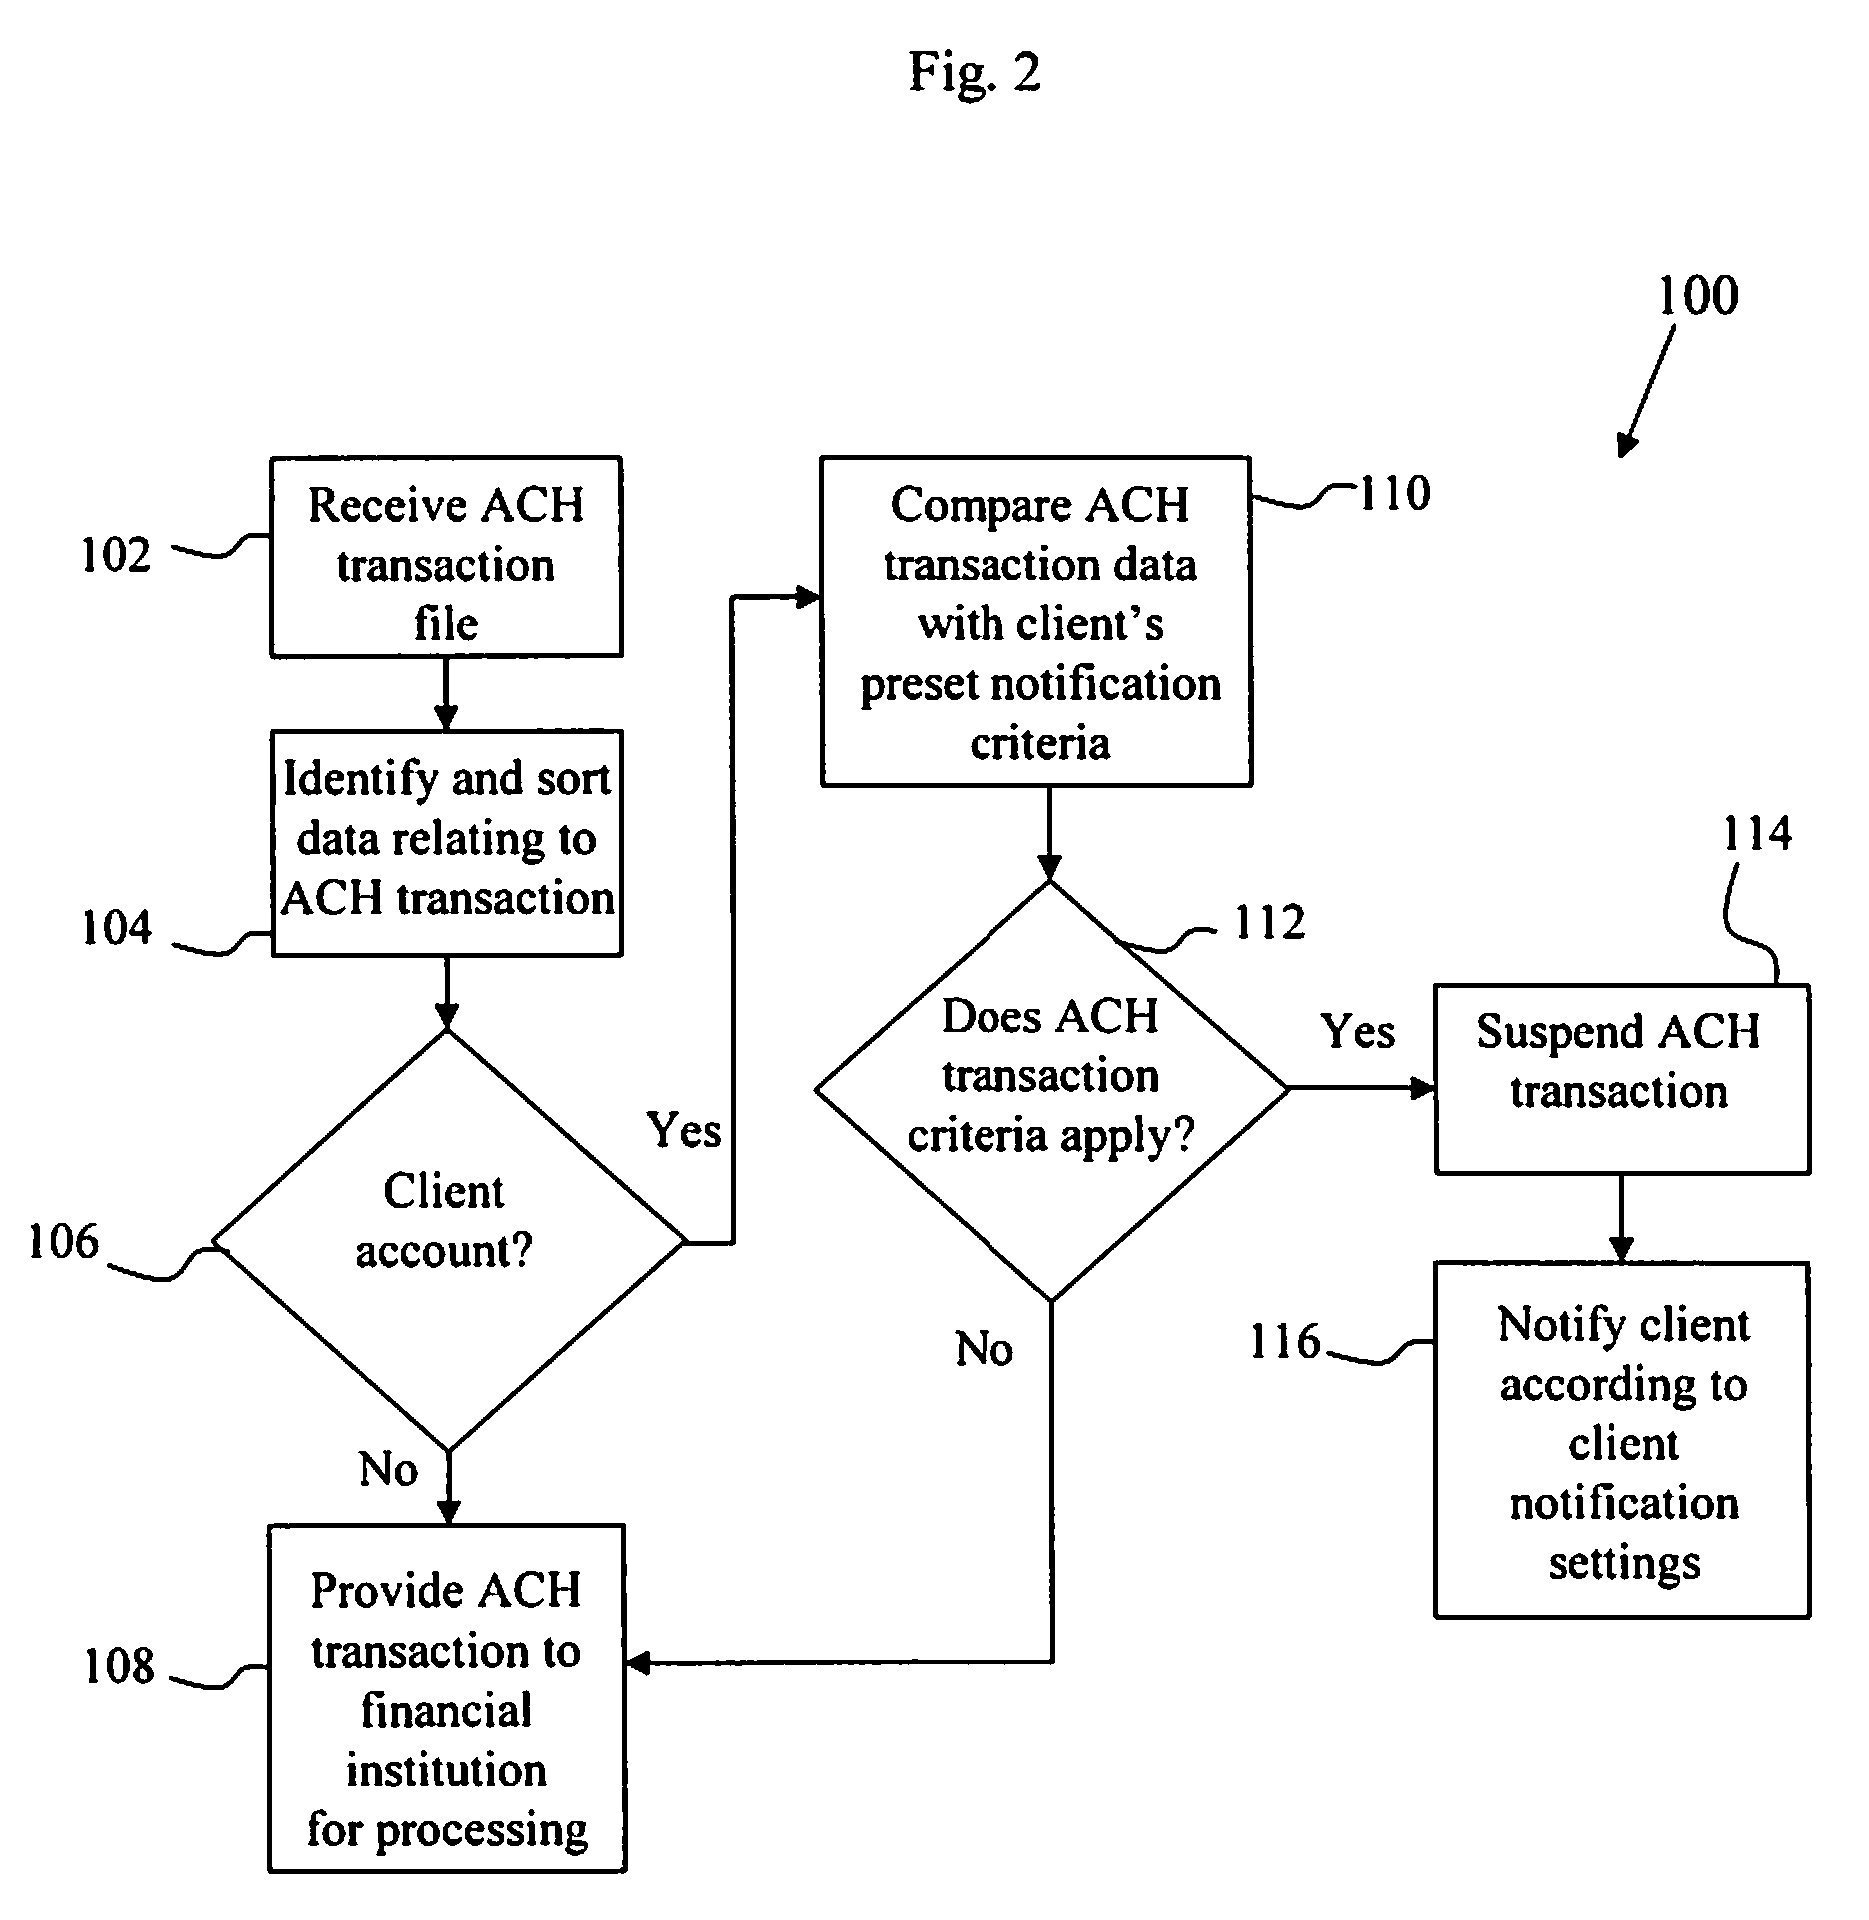 Systems and methods for providing ach transaction notification and facilitating ach transaction disputes